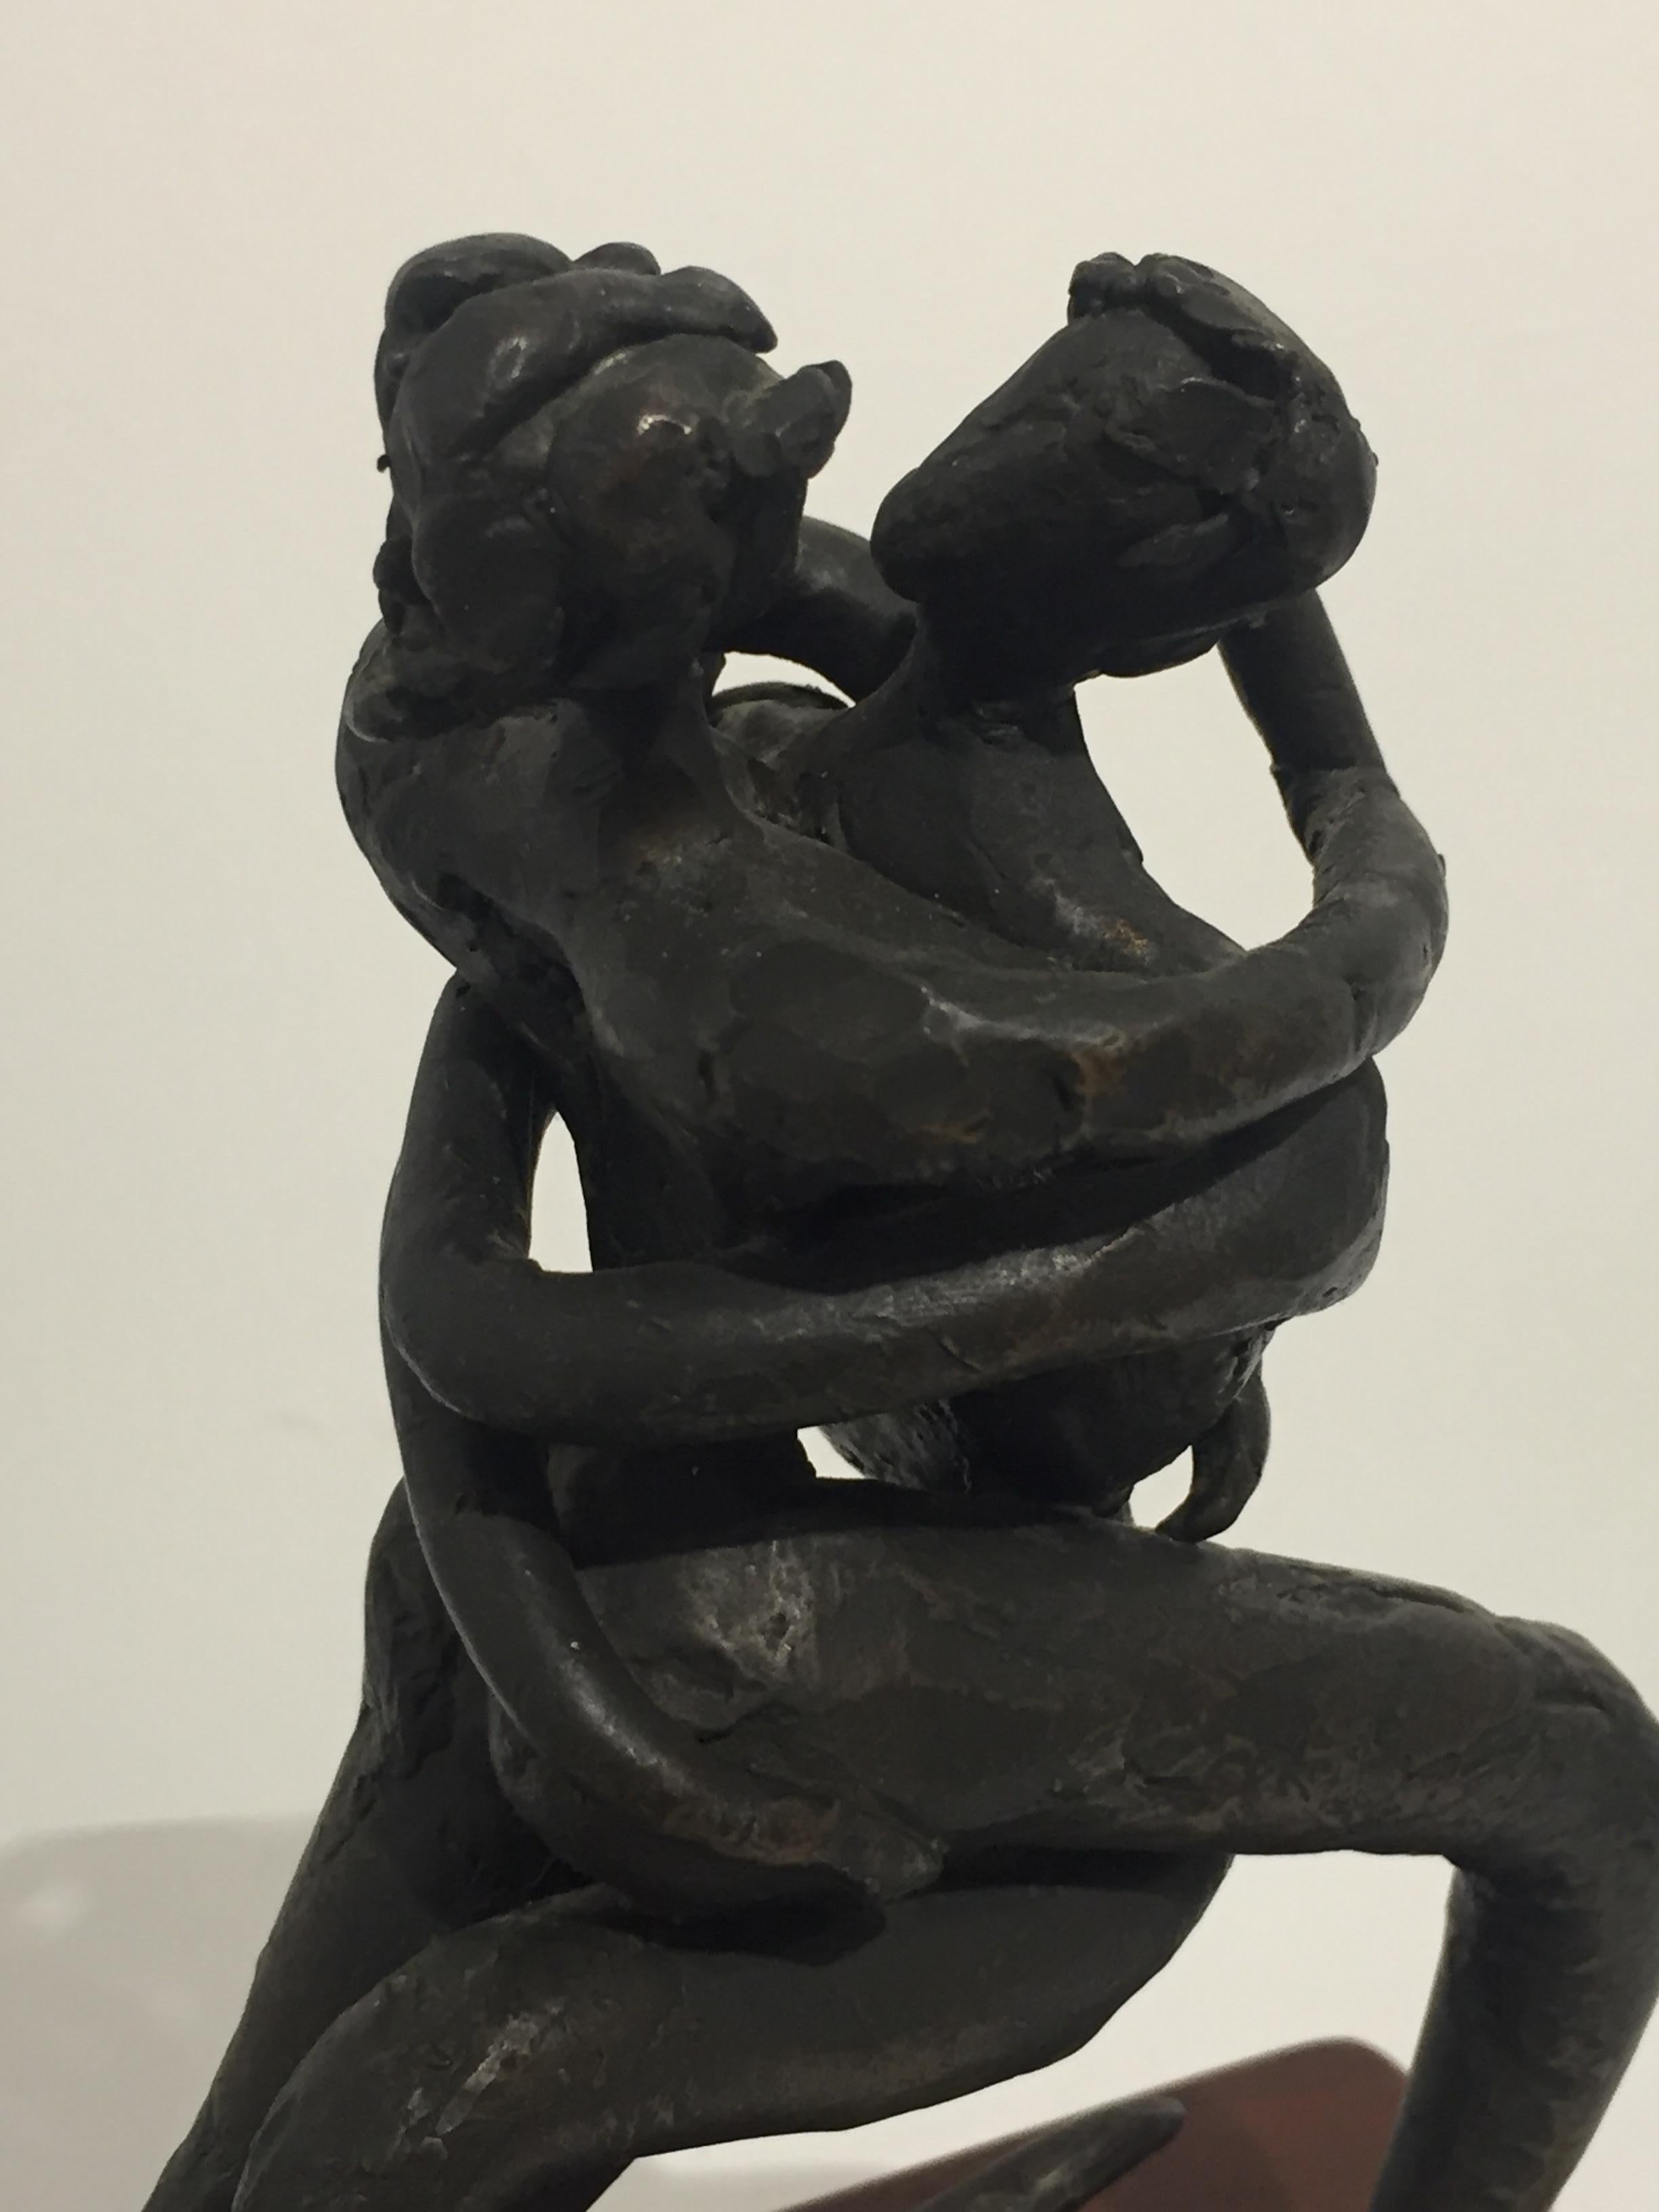 Figurative bronze sculpture of two lovers embracing. The sculpture has a coarse texture, a dark patina, and wood base.

Measures
Sculpture: 7.5